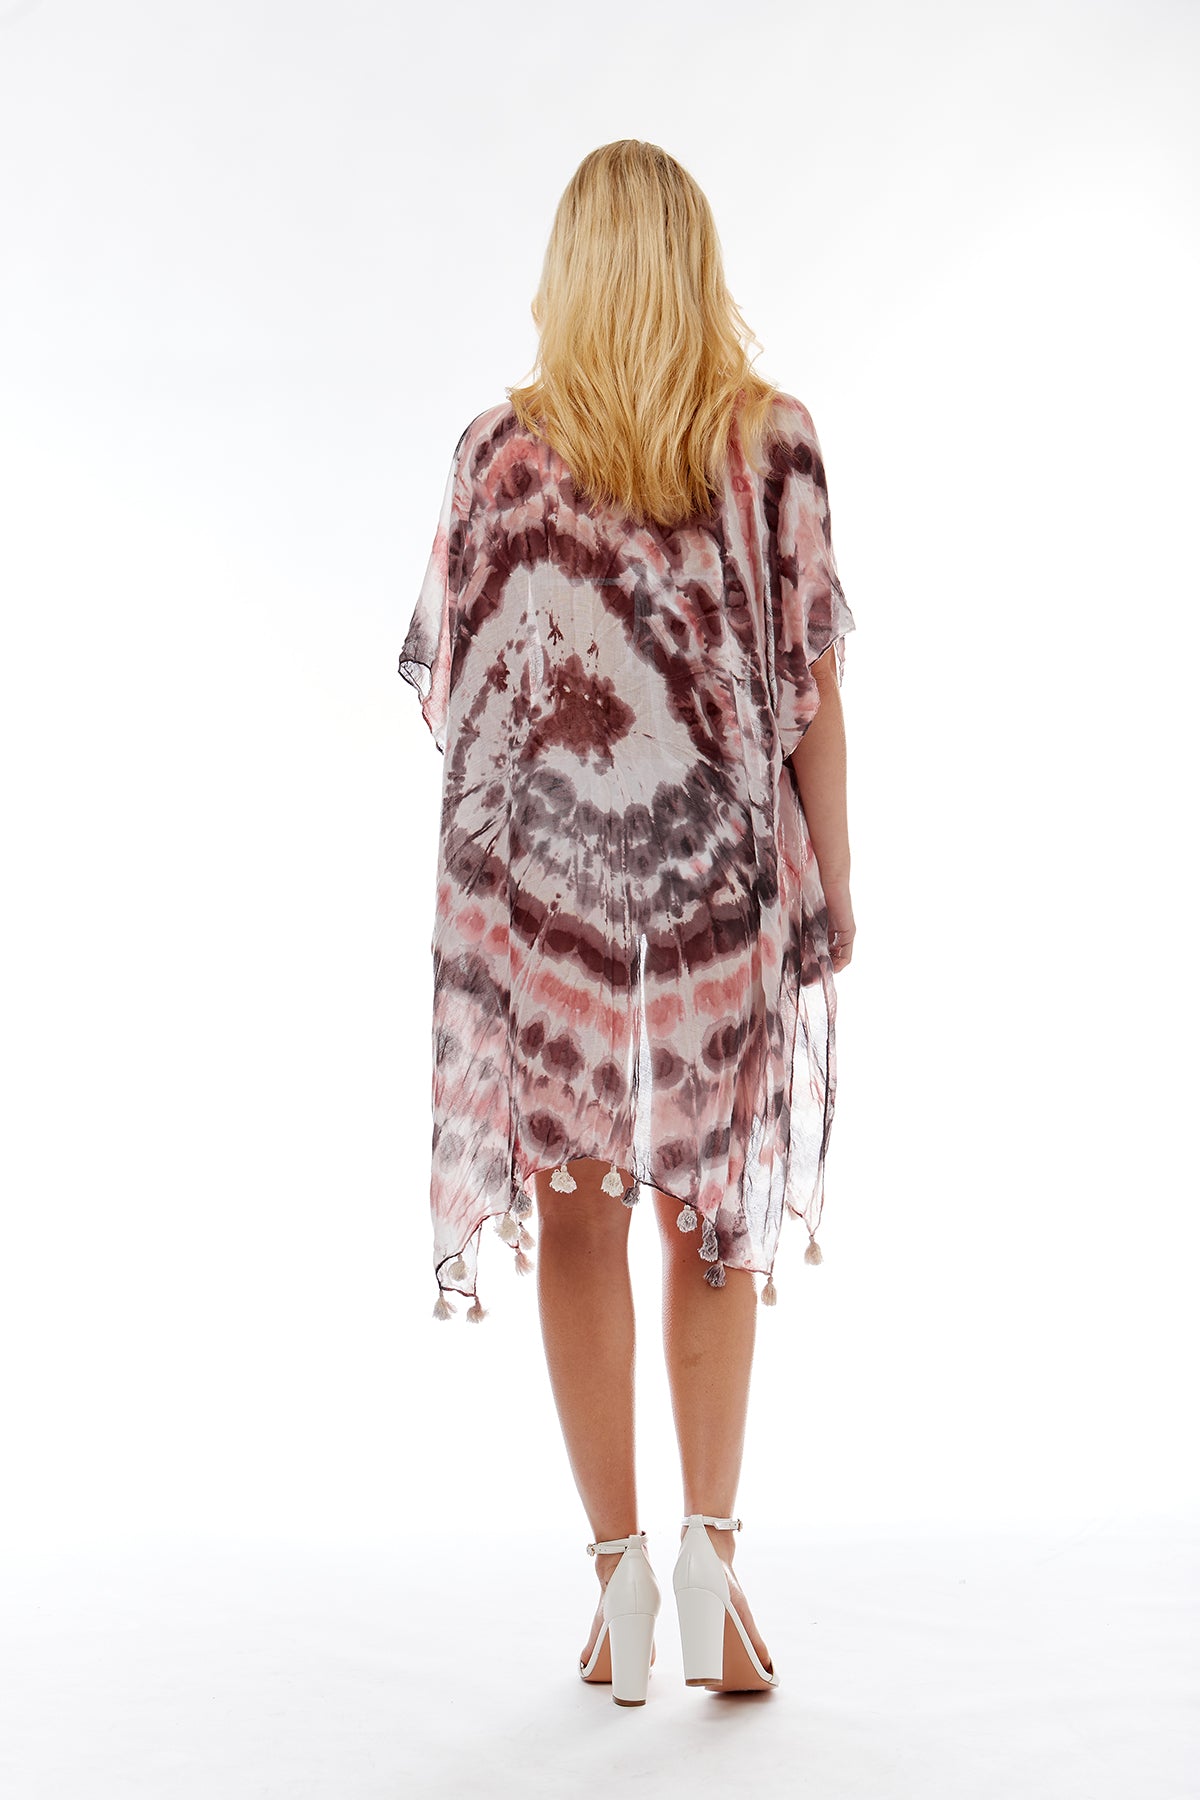 Black and Pink Tie Dye Beach Cover Up